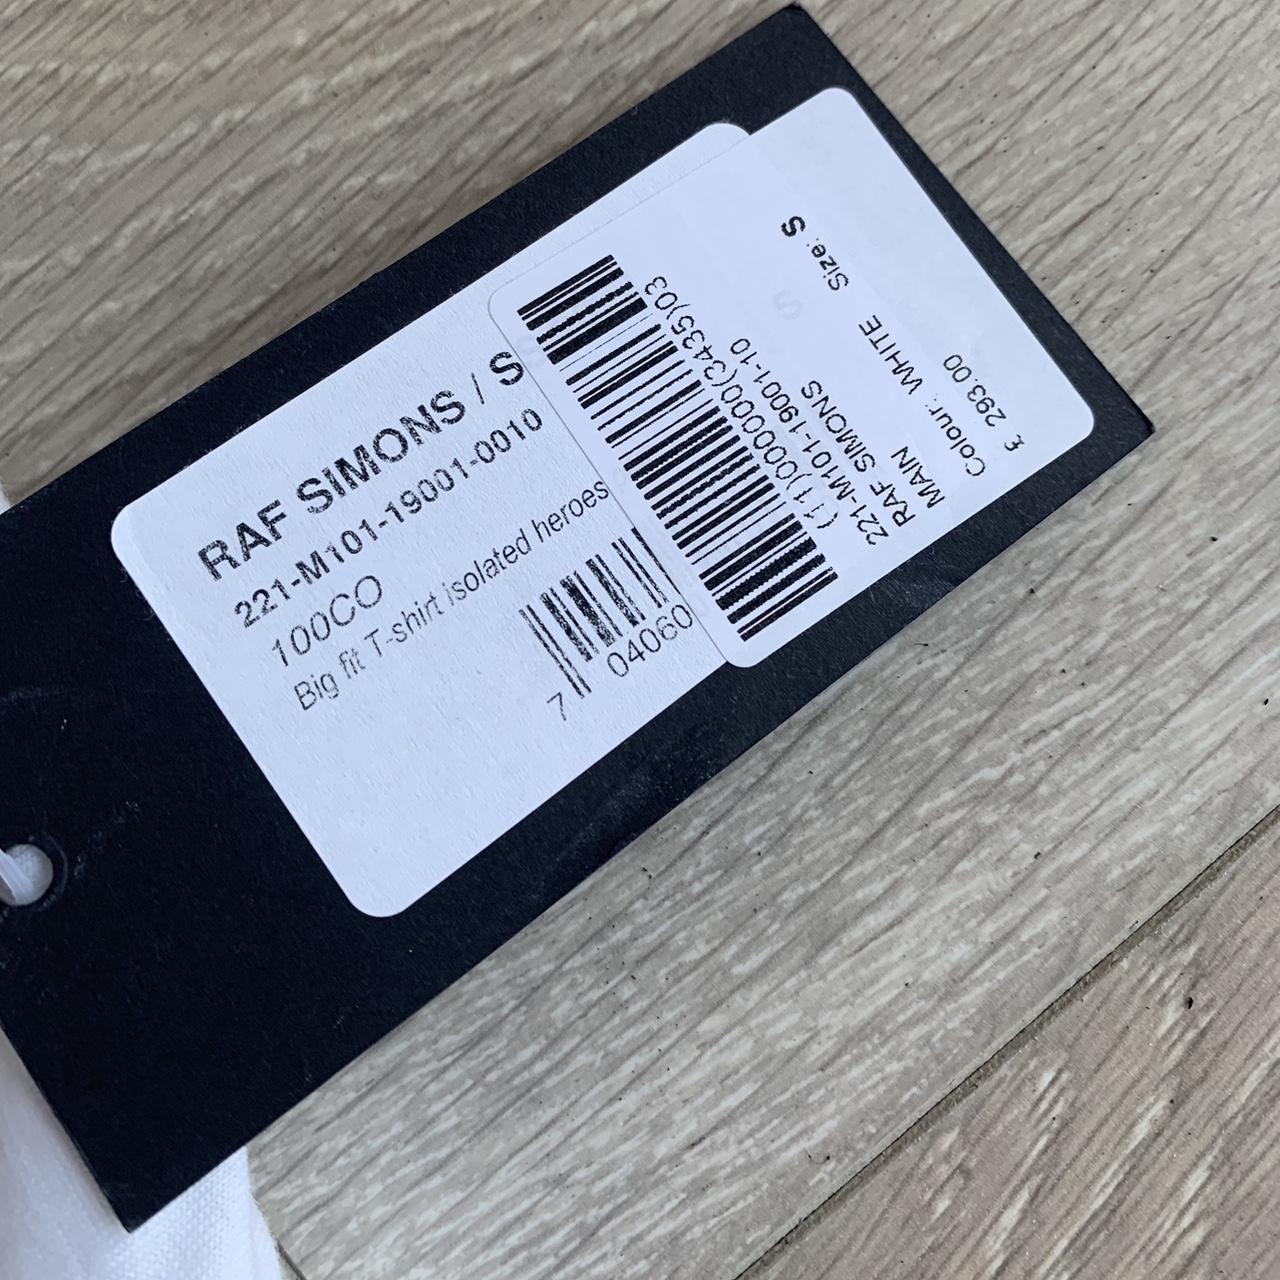 RARE Raf Simons DSM exclusive Brand New with Tags... - Depop